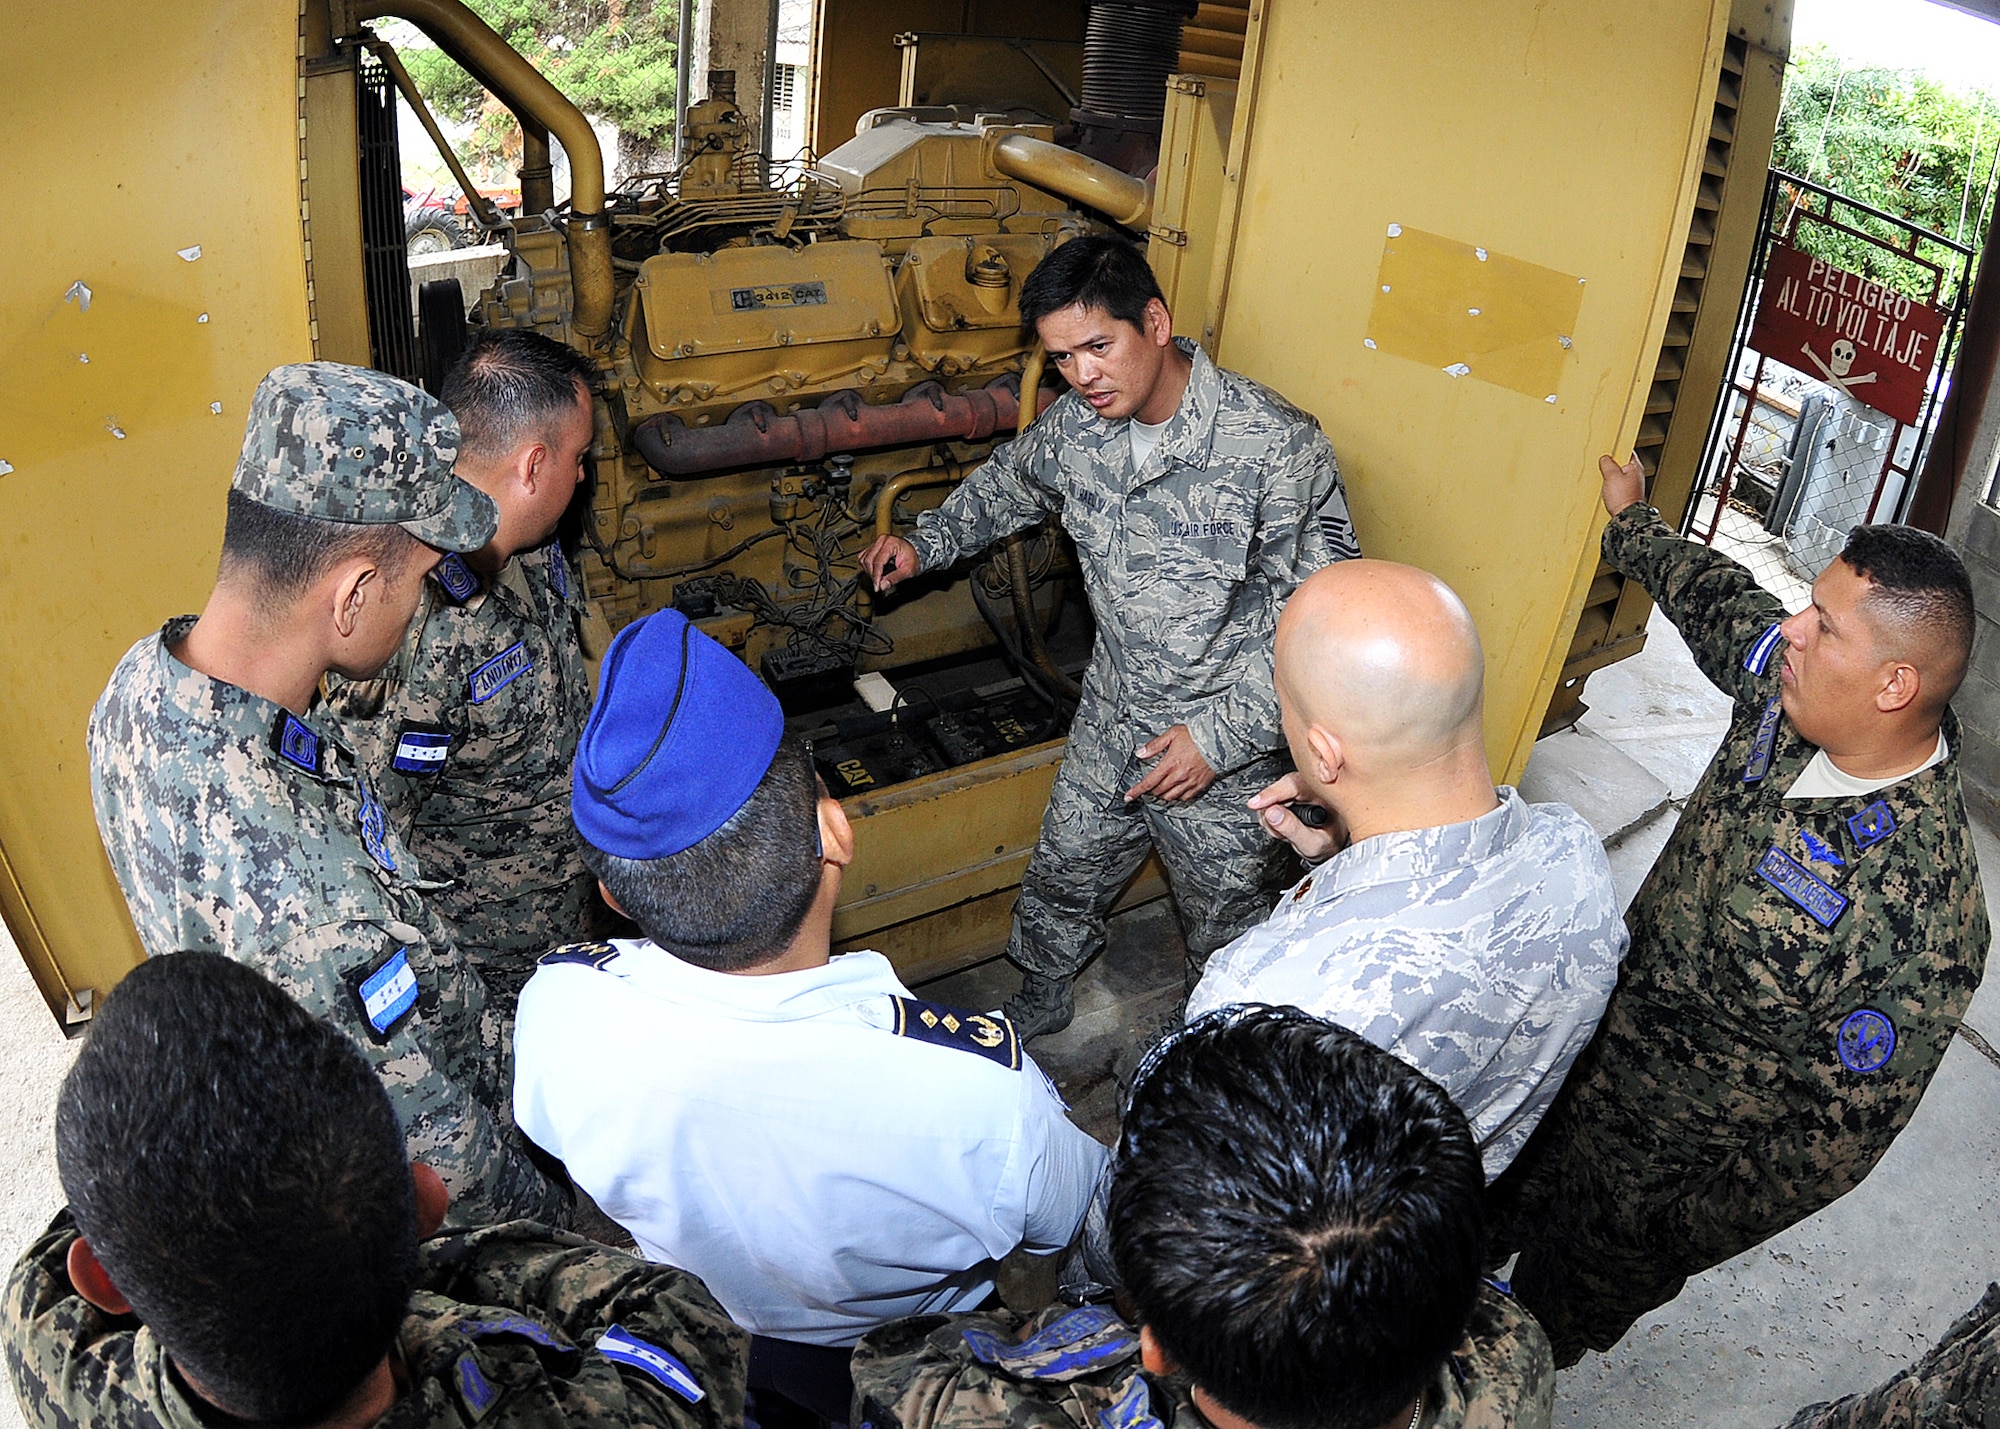 Master Sgt. Ronald Hael, 571st Mobility Support Advisory Squadron power production air advisor, explains to the Honduran Air Force the importance of preoperational inspection on the generator at Col. Hernán Acosta Mejia Air Base, Tegucigalpa, Honduras, Feb. 13.  A group of approximately 20 members of Air Mobility Command's 571st Mobility Support Advisory Squadron, alongside their Honduran Air Force counterparts, are participating in a month-long building partner capacity mission designed to enhance military-to-military relations between the two nations.  (U.S. Air Force photo by Tech. Sgt. Lesley Waters)